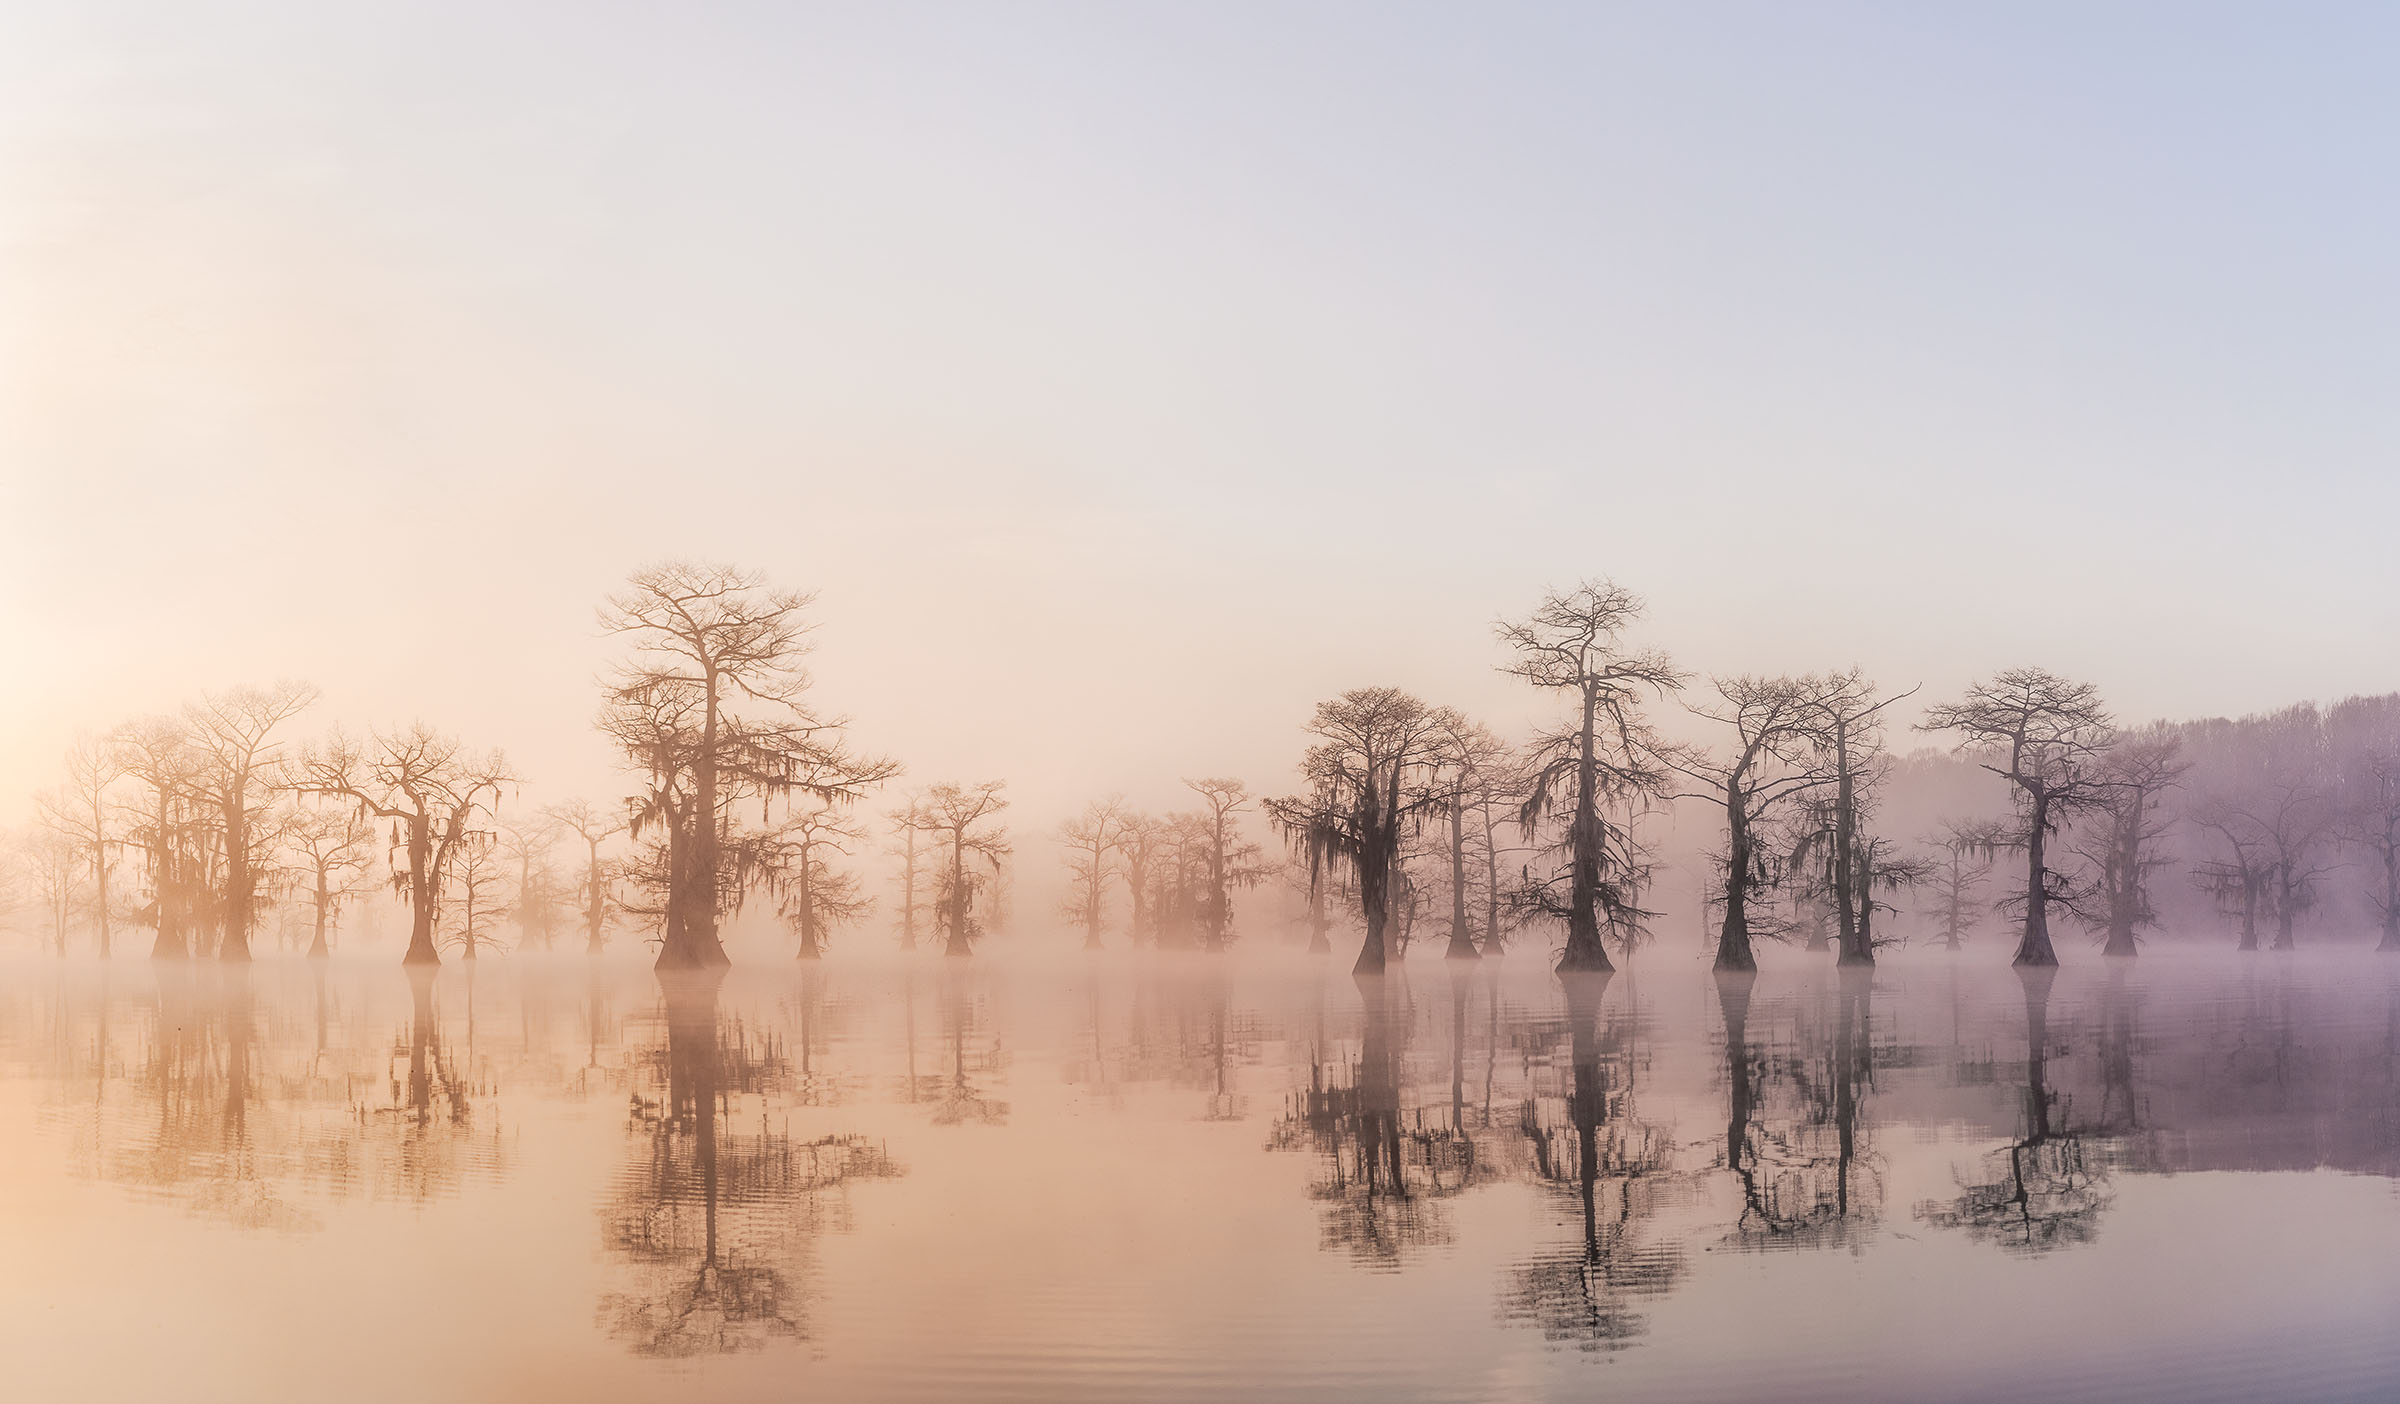 A group of trees grow from flat water with a misty blue-yellow tone around